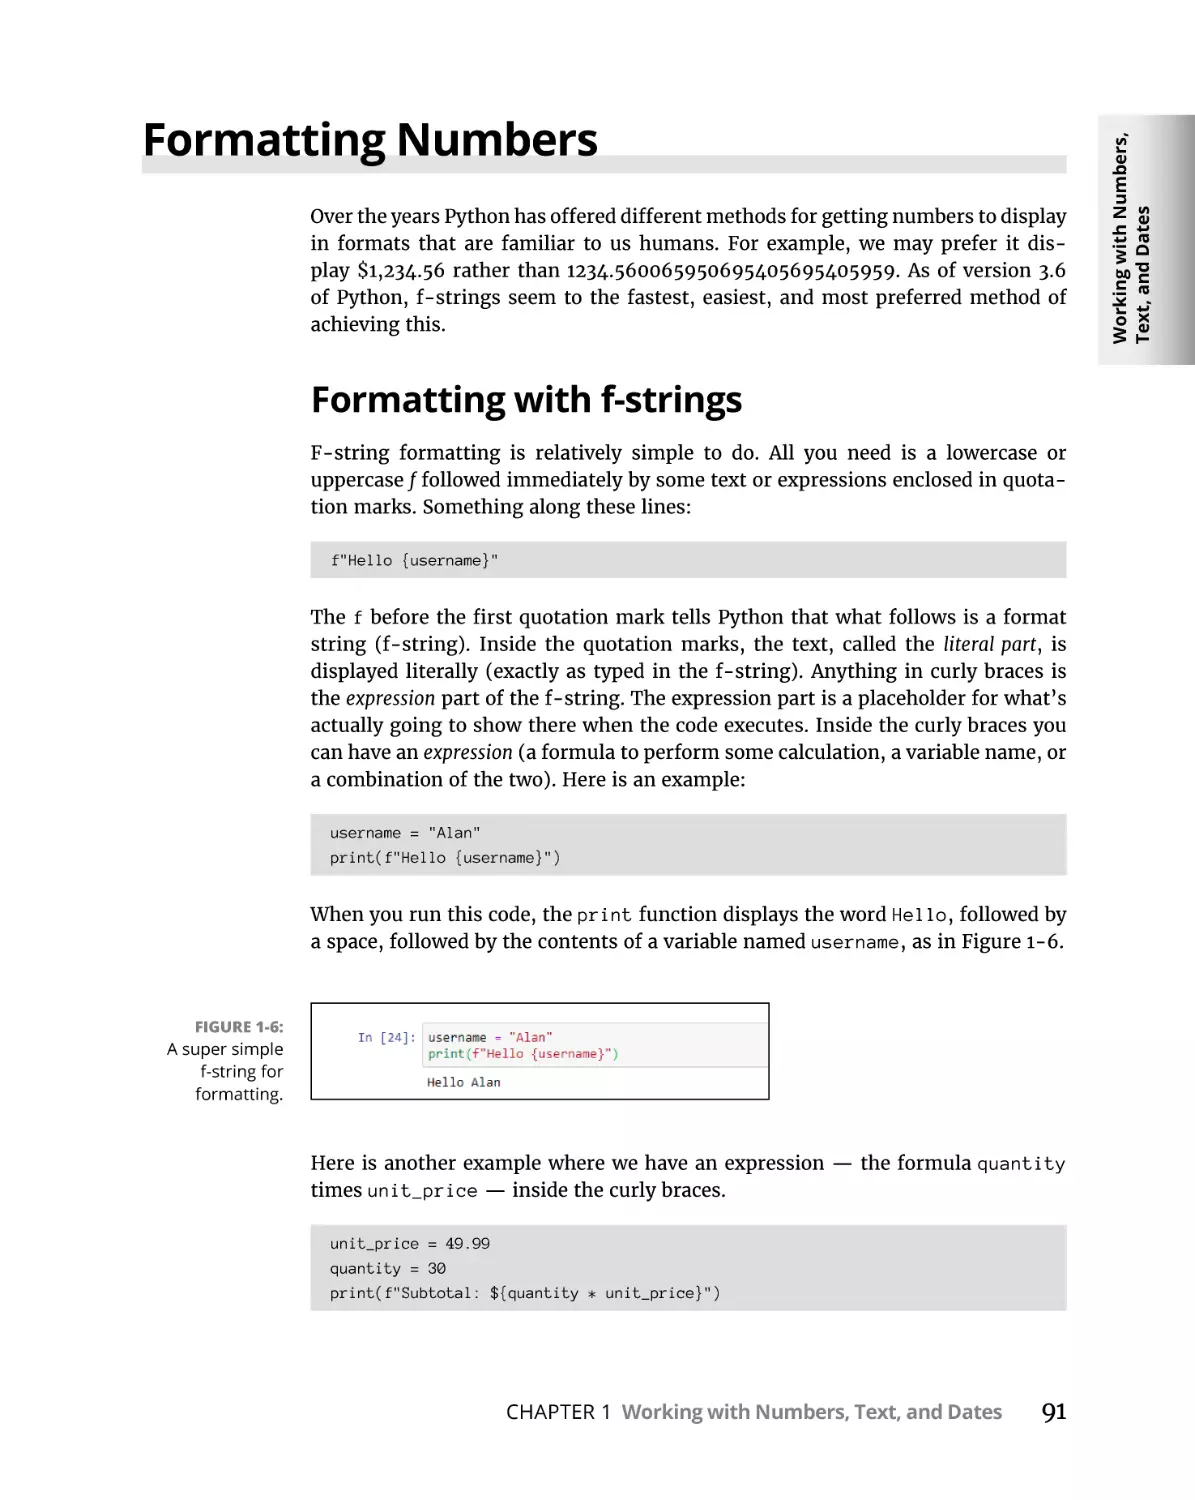 Formatting Numbers
Formatting with f-strings